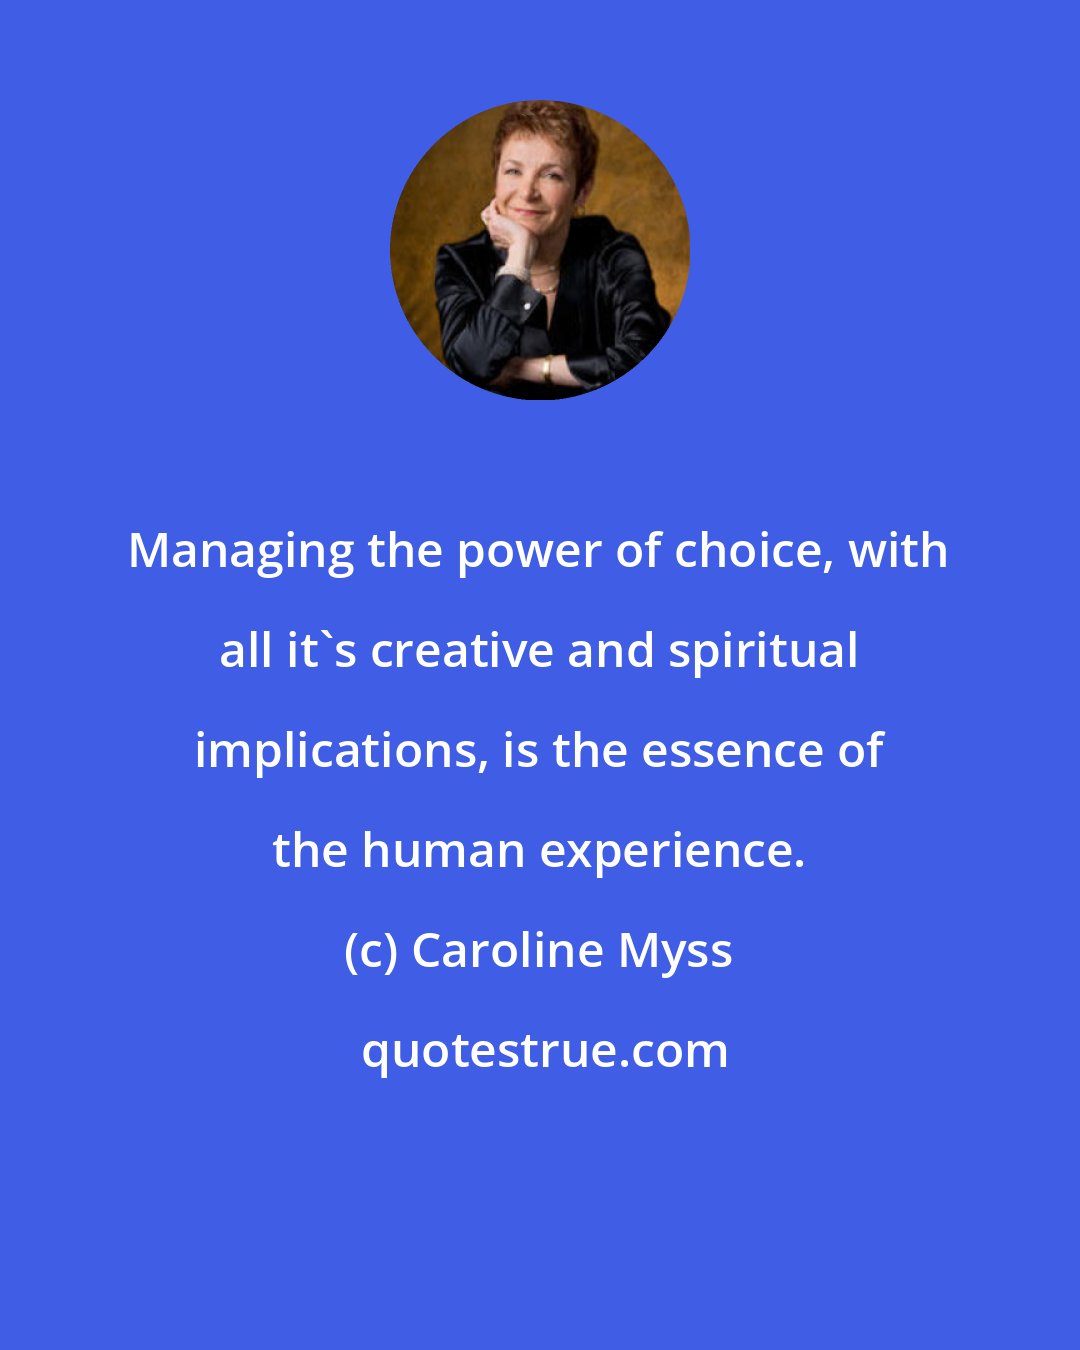 Caroline Myss: Managing the power of choice, with all it's creative and spiritual implications, is the essence of the human experience.